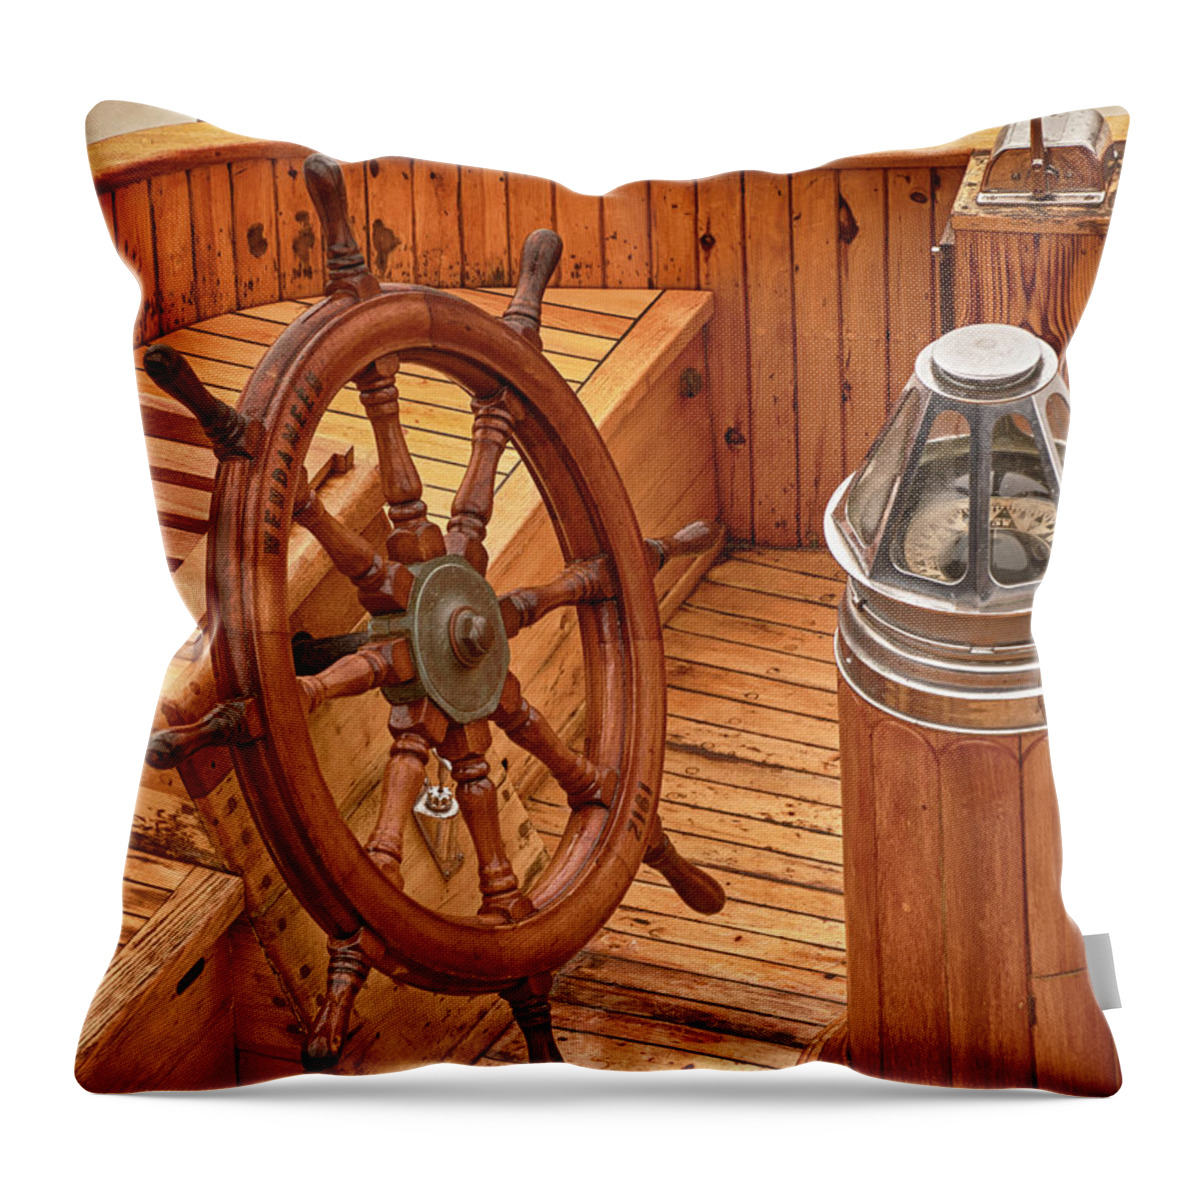 Ship's Wheel; Compass; Ship; Boat; Wheel; New England; Portland; Maine Throw Pillow featuring the photograph Wheel and Compass by Mick Burkey